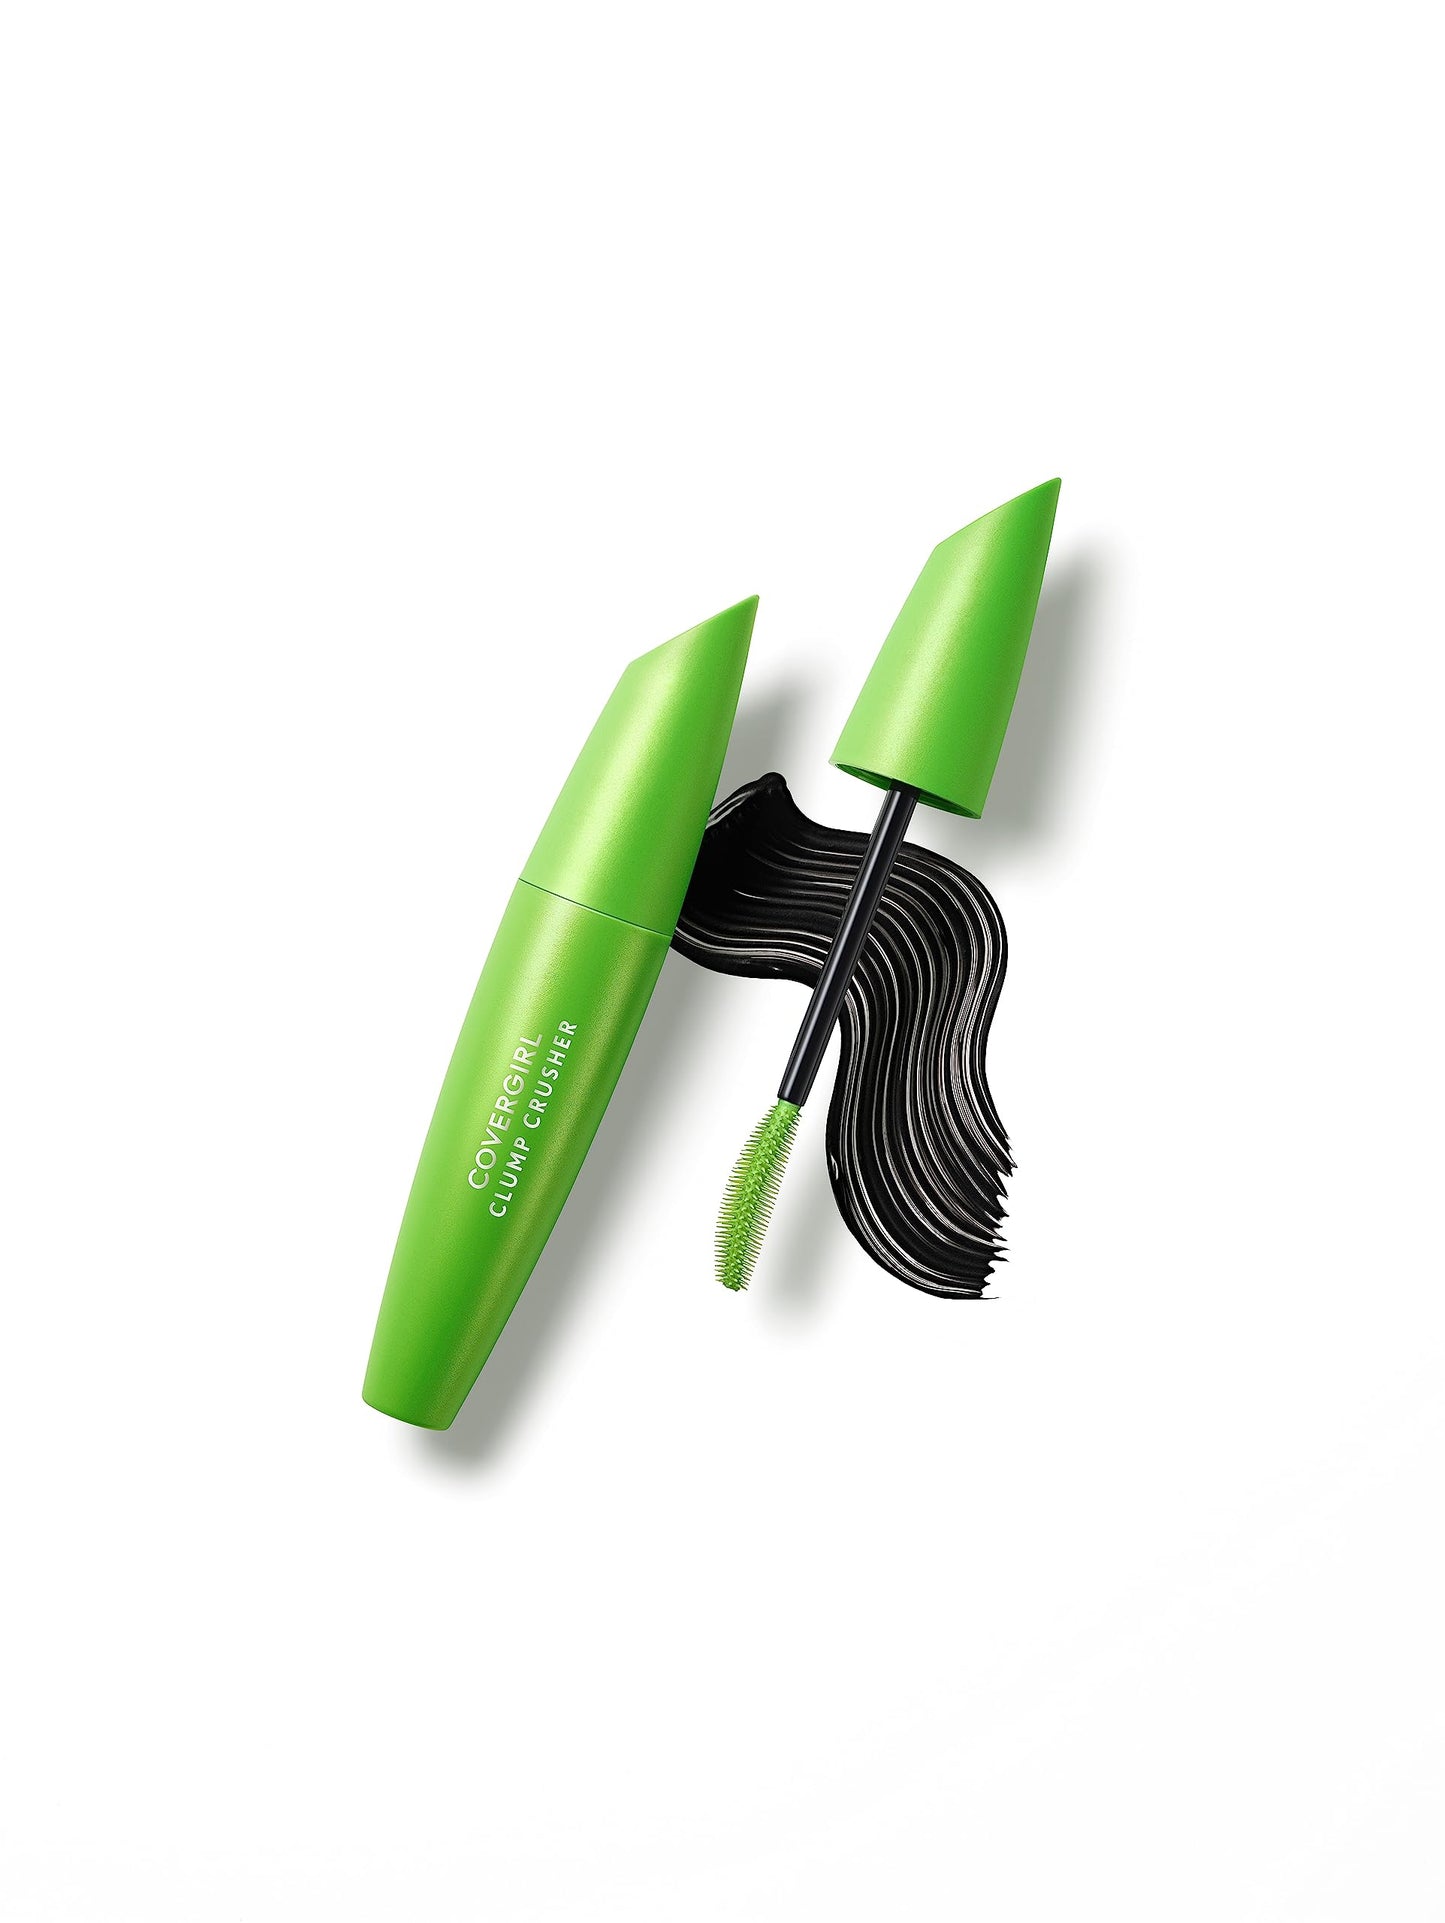 COVERGIRL - Clump Crusher by Lash Blast Mascara, 20X More Volume, Double Sided Brush, Long-Lasting Wear, 100% Cruelty-Free